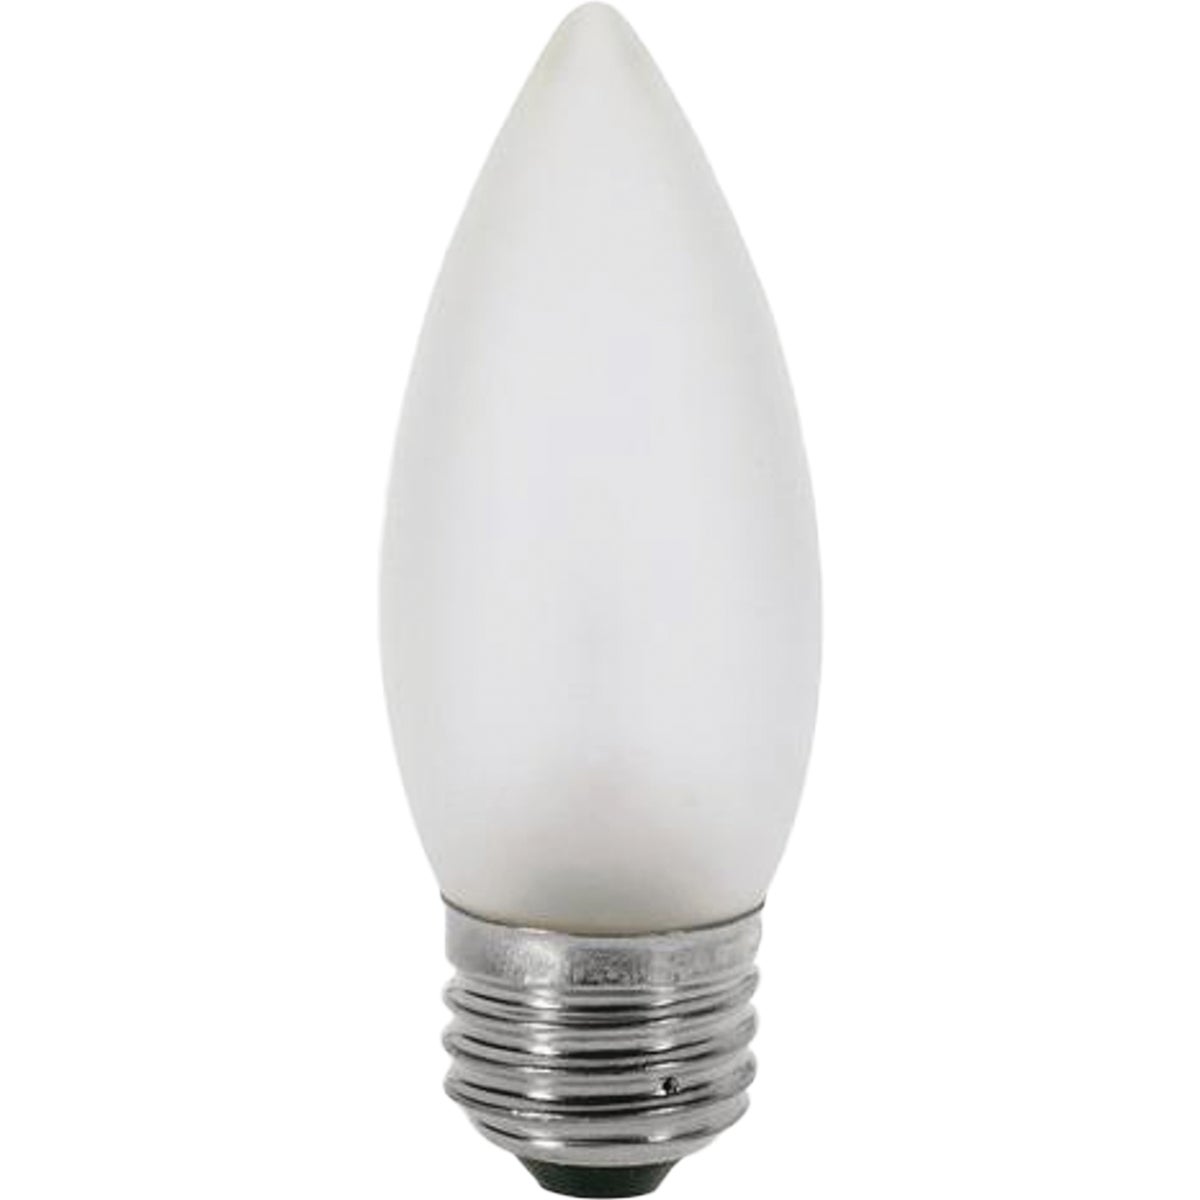 Item 518359, Decorative LED (light emitting diode) with a traditional incandescent look 